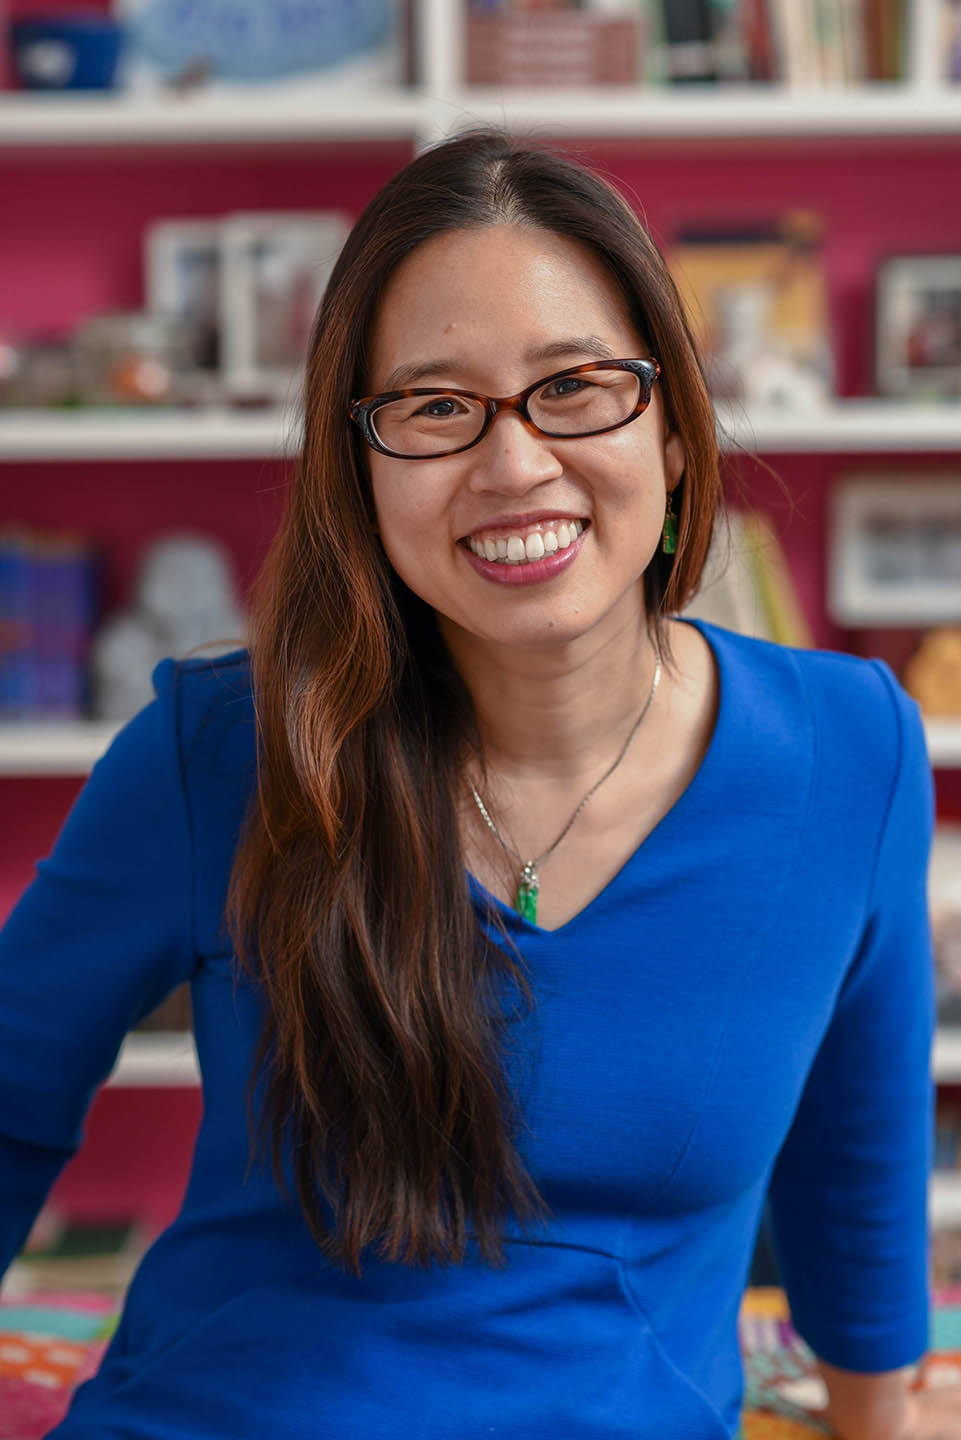 Smiling childrens author Grace Lin in blue sweater with bookshelf behind her